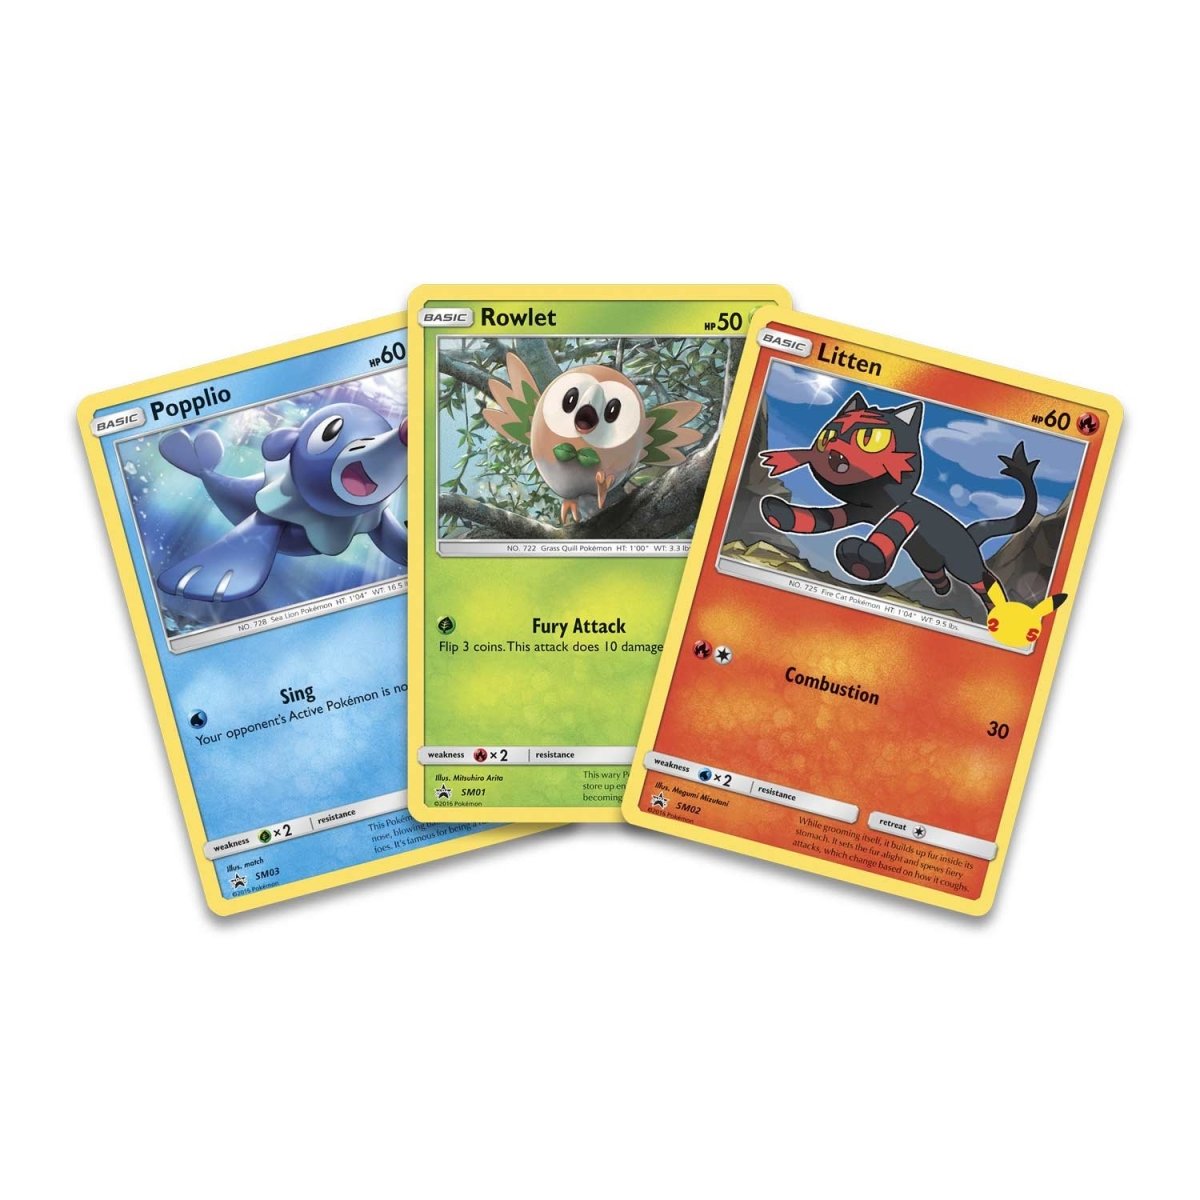 Pokémon TCG Product Review: First Partner Pack: Alola